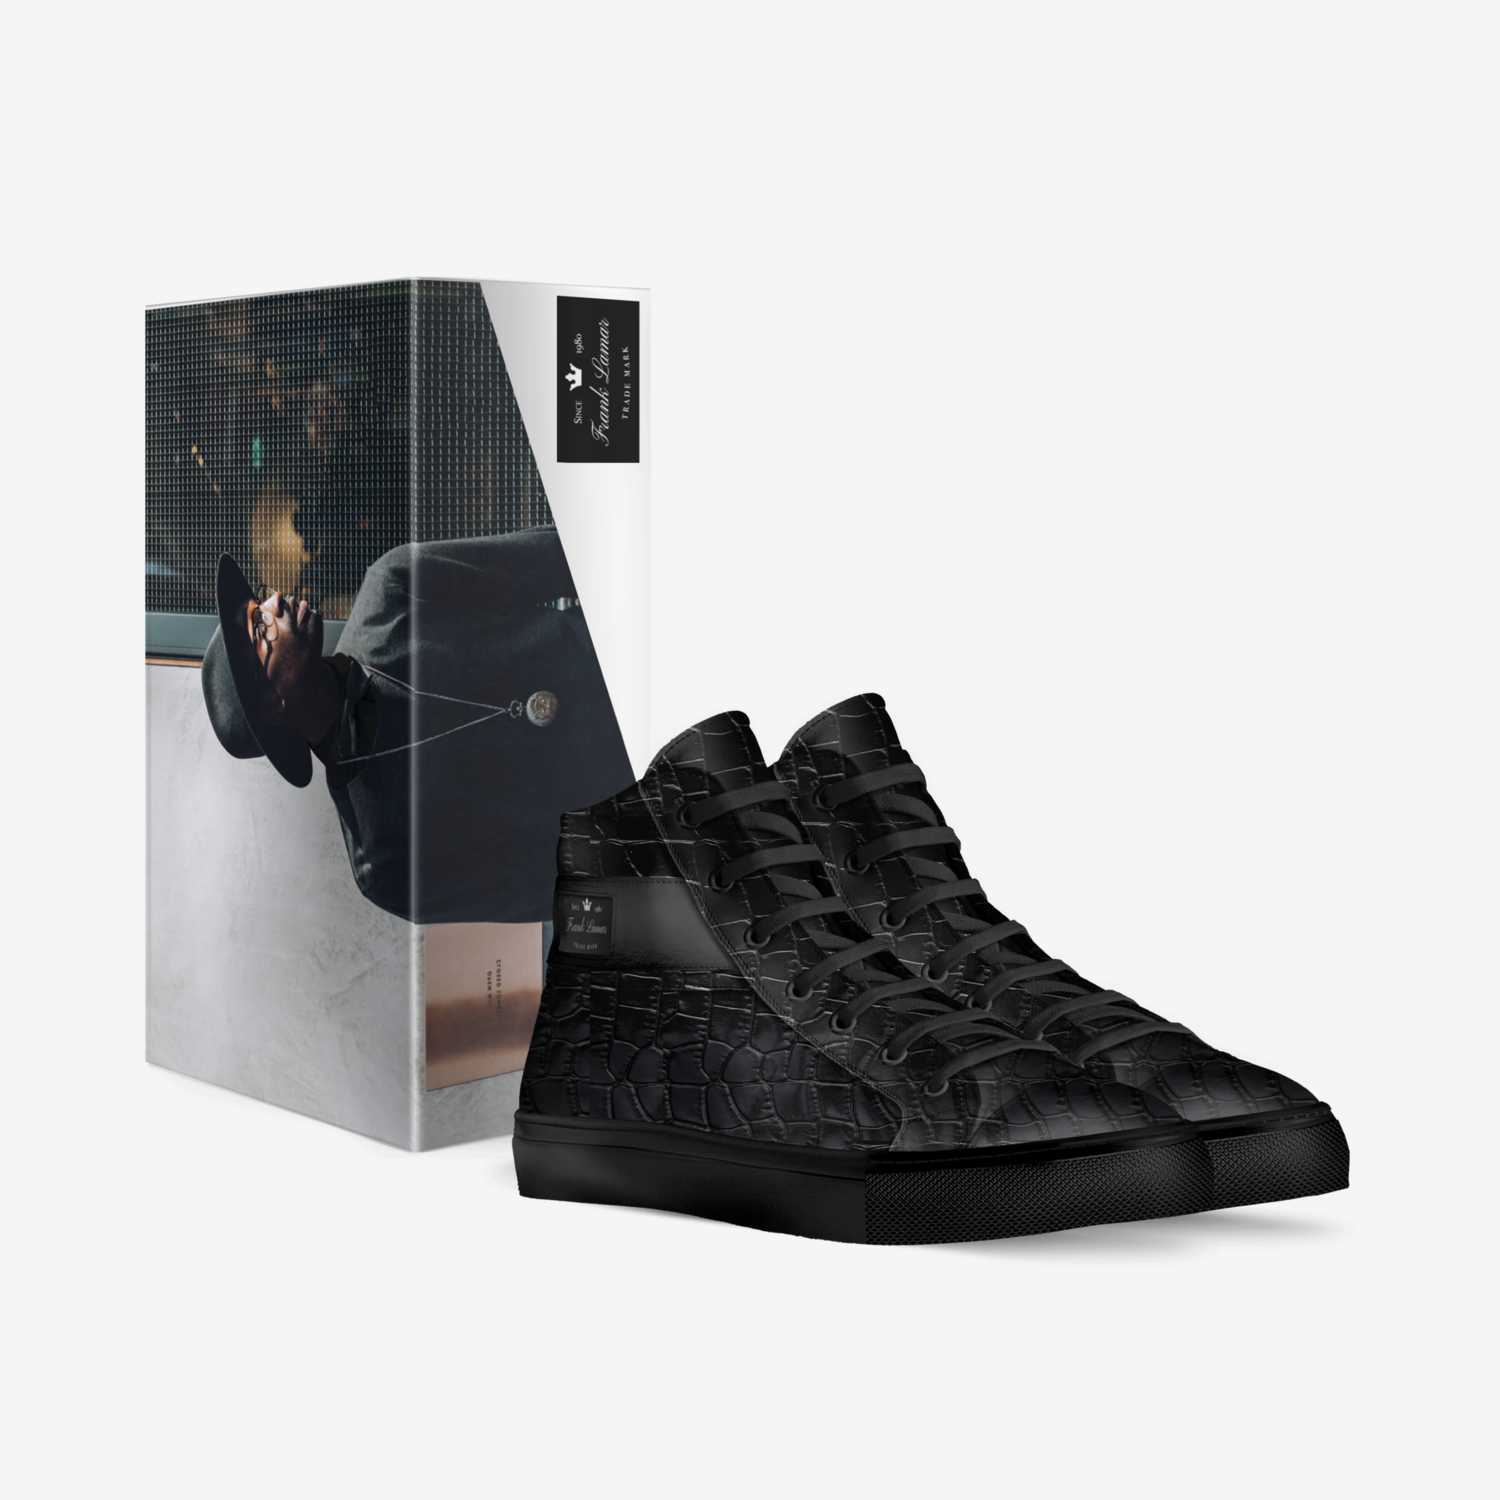 Olu-luxe 06 custom made in Italy shoes by Frank Lamar | Box view